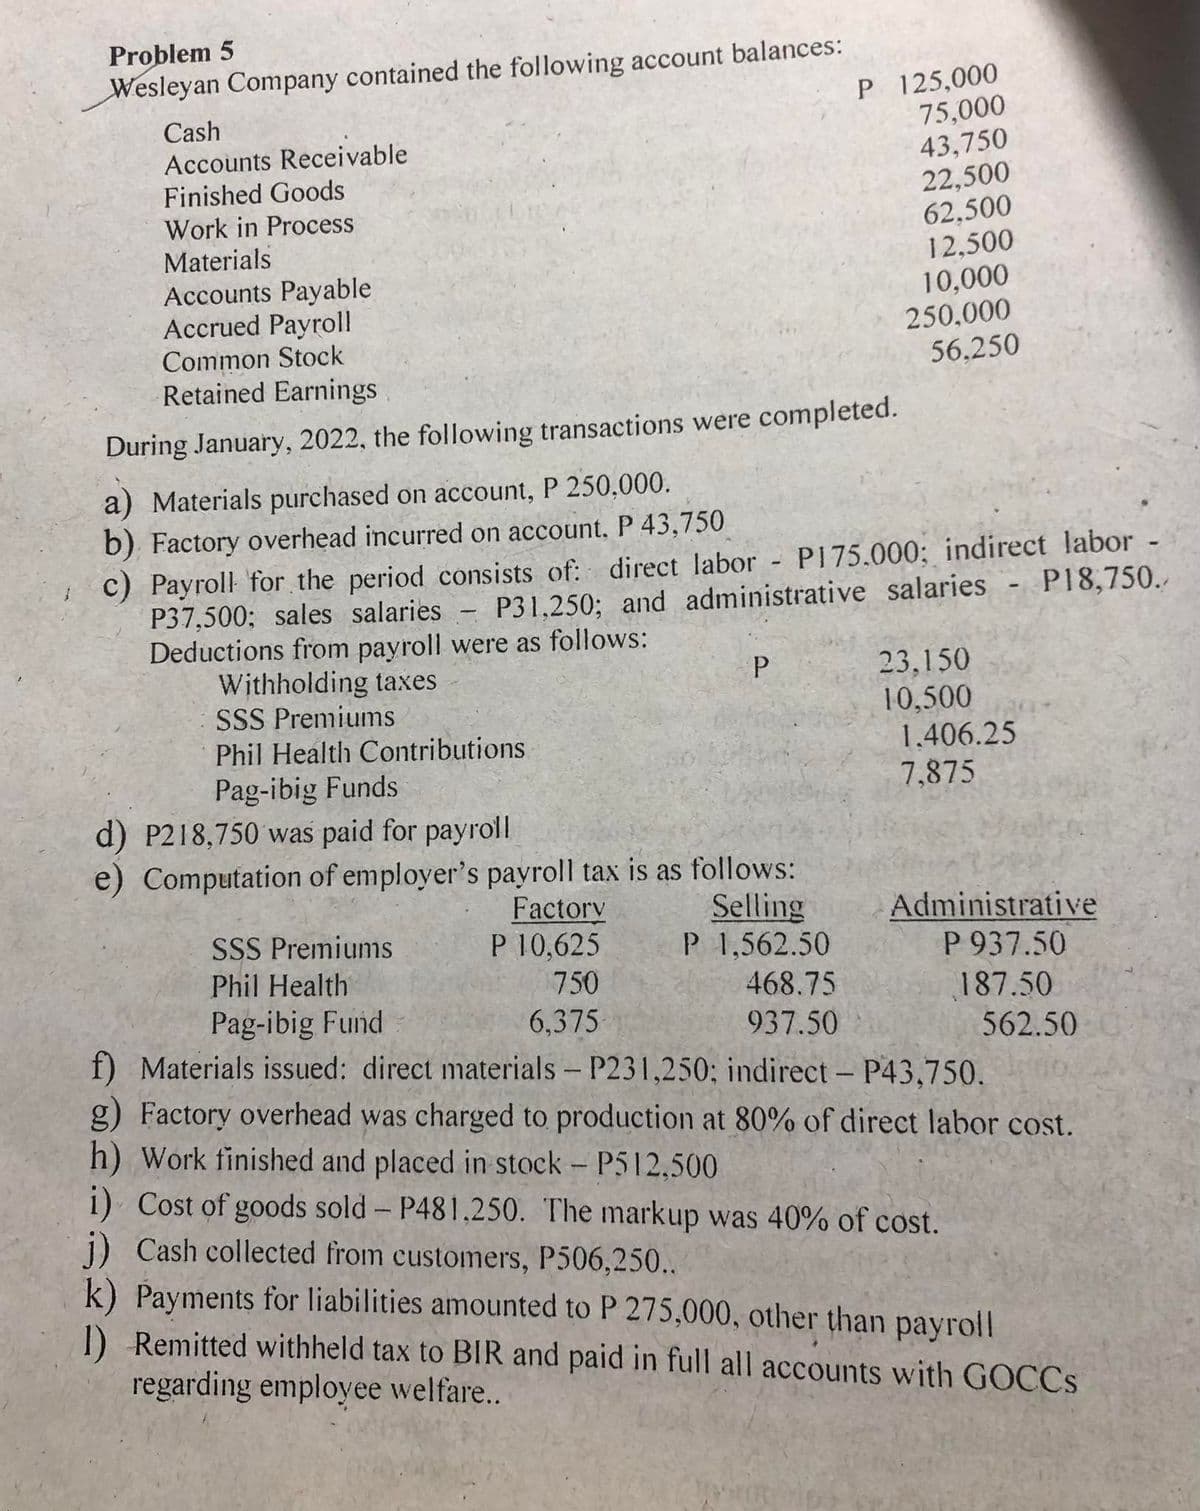 Problem 5
Wesleyan Company contained the following account balances:
Cash
Accounts Receivable
Finished Goods
Work in Process
Materials
Accounts Payable
Accrued Payroll
Common Stock
Retained Earnings
During January, 2022, the following transactions were completed.
a) Materials purchased on account, P 250,000.
b) Factory overhead incurred on account. P 43,750
1
Deductions from payroll were as follows:
Withholding taxes
SSS Premiums
Phil Health Contributions
c) Payroll for the period consists of: direct labor - P175.000; indirect labor
P37,500; sales salaries P31,250; and administrative salaries -
P18,750.
SSS Premiums
Phil Health
Pag-ibig Fund
Pag-ibig Funds
d) P218,750 was paid for payroll
e) Computation of employer's payroll tax is as follows:
Selling
P 1,562.50
P
Factory
P 10,625
750
6,375-
P
468.75
937.50
125,000
75,000
43,750
22,500
62,500
12,500
10,000
250,000
56.250
23,150
10.500
1.406.25
7,875
Administrative
P 937.50
187.50
562.50
f) Materials issued: direct materials - P231,250; indirect - P43,750.
g) Factory overhead was charged to production at 80% of direct labor cost.
h) Work finished and placed in stock - P512,500
i) Cost of goods sold - P481.250. The markup was 40% of cost.
-
i) Cash collected from customers, P506,250..
k) Payments for liabilities amounted to P 275,000, other than payroll
1) Remitted withheld tax to BIR and paid in full all accounts with GOCCs
regarding employee welfare..